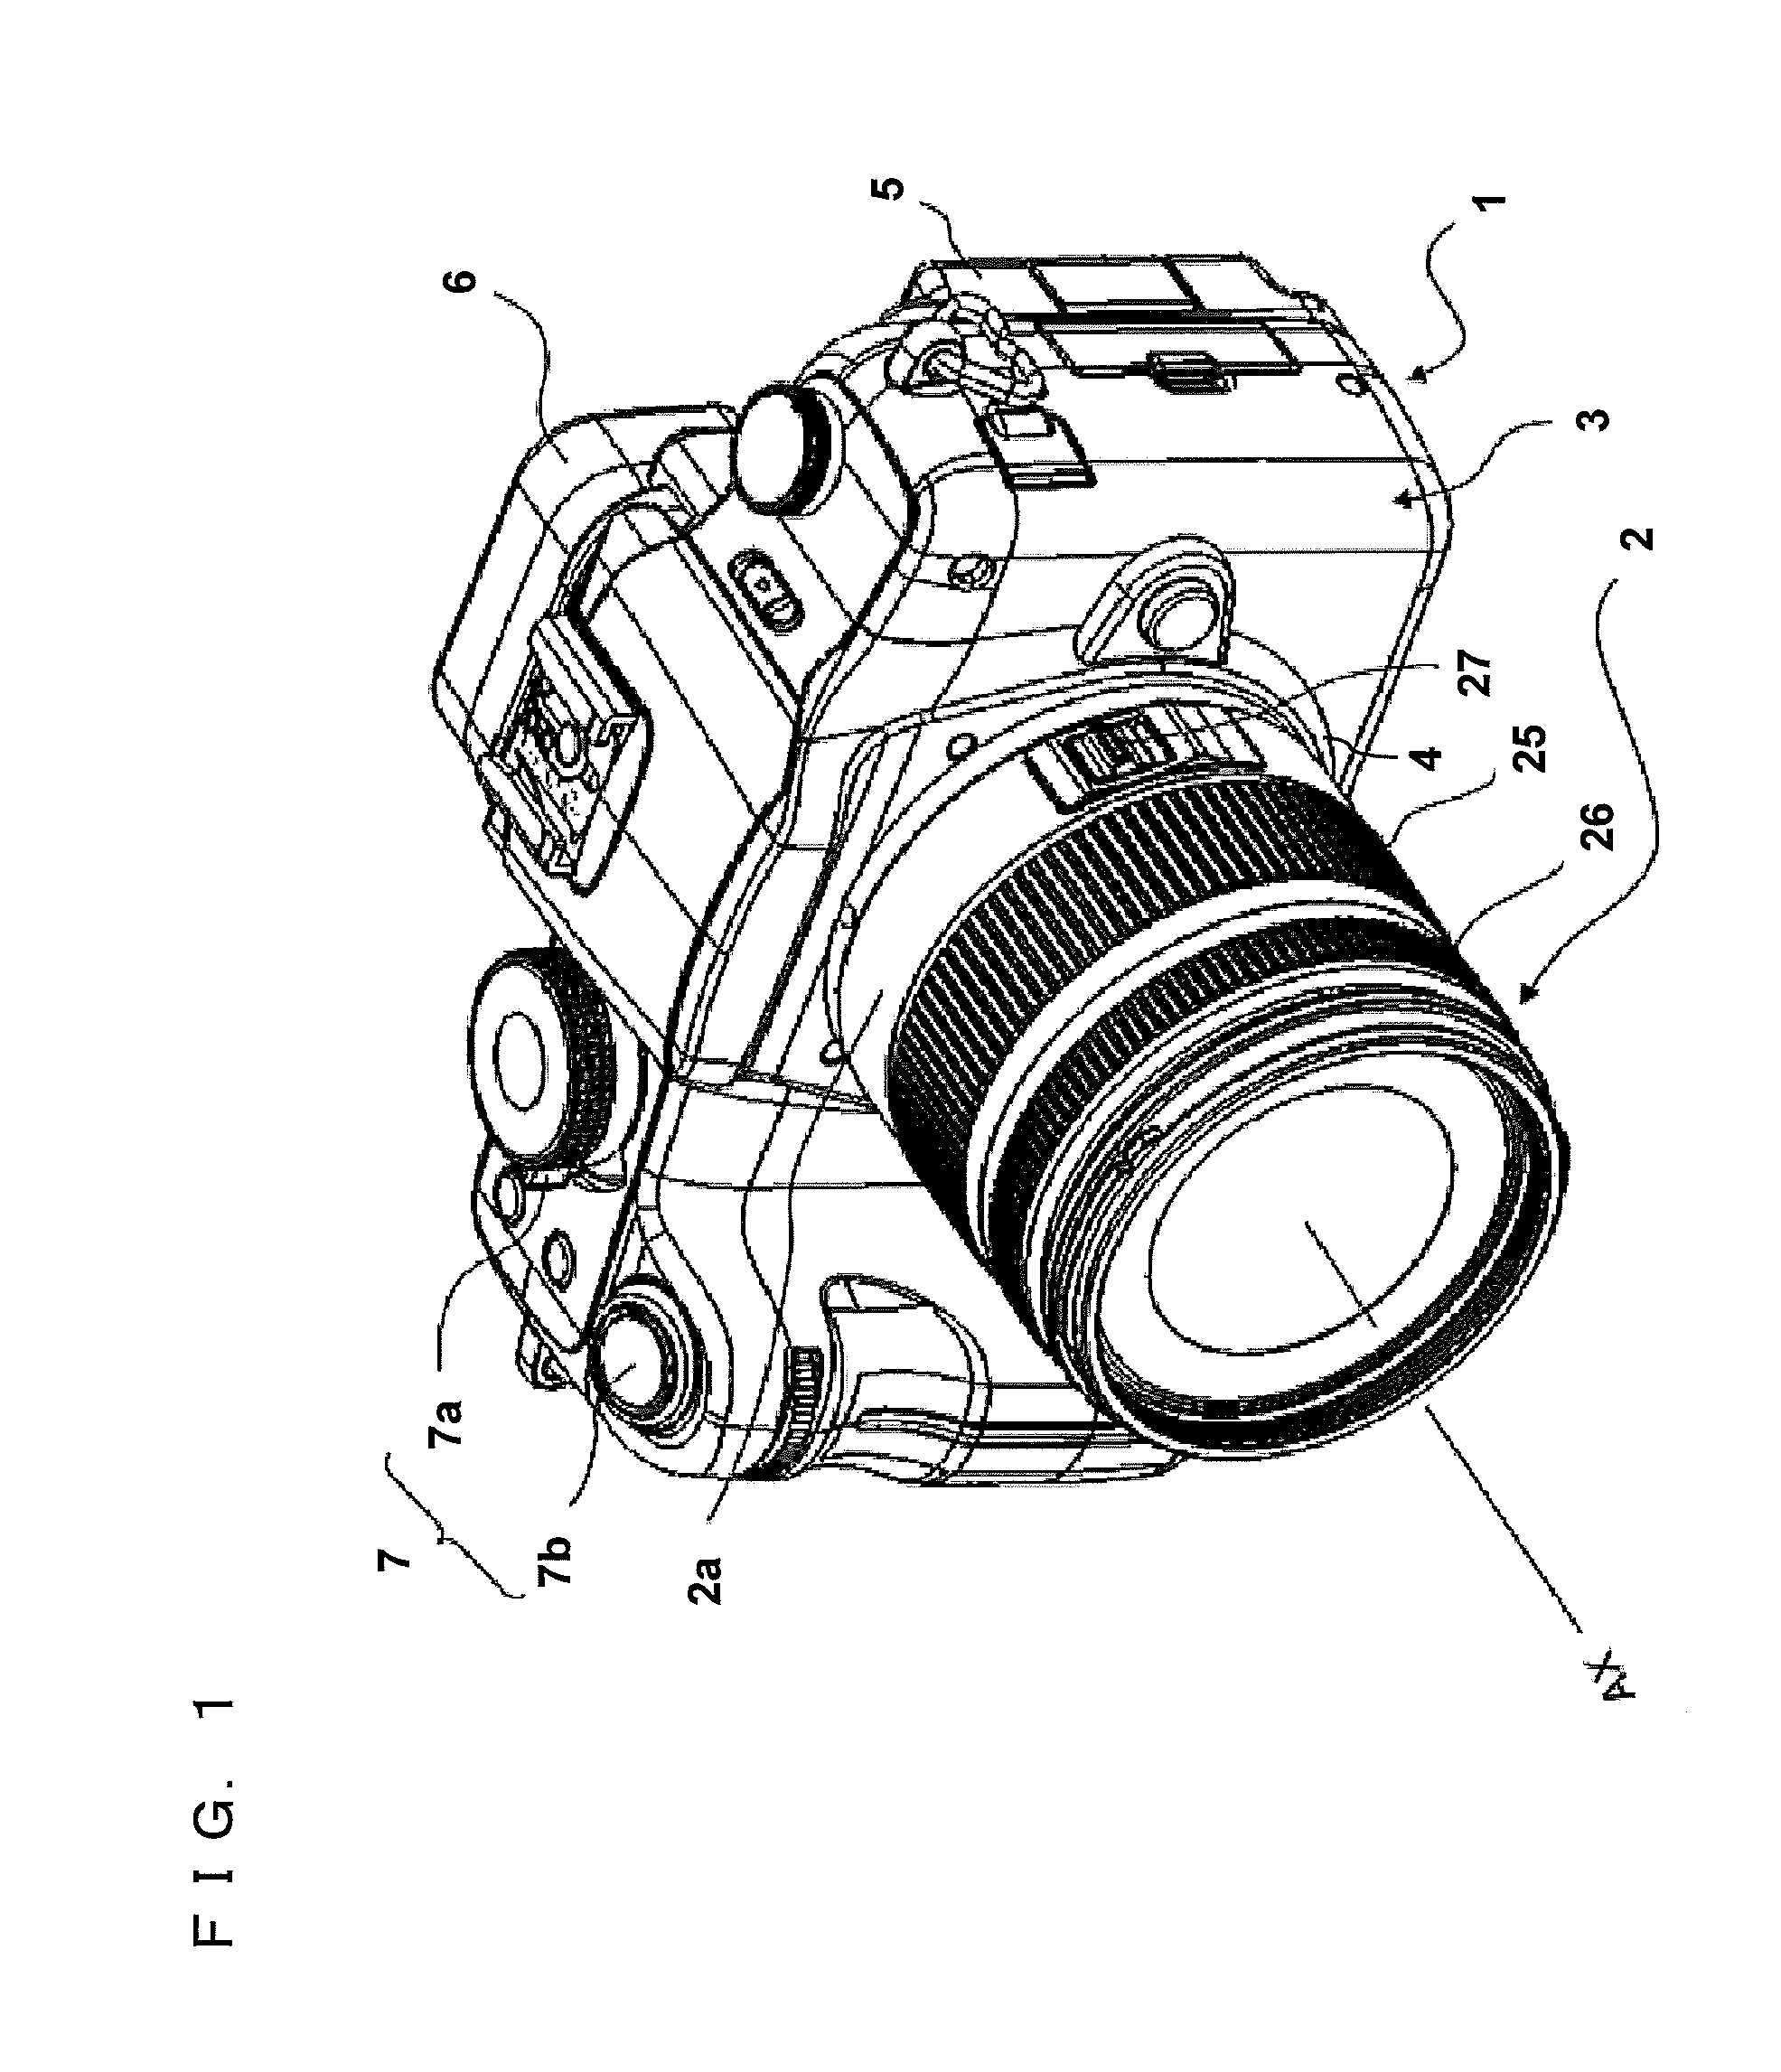 Imaging Device